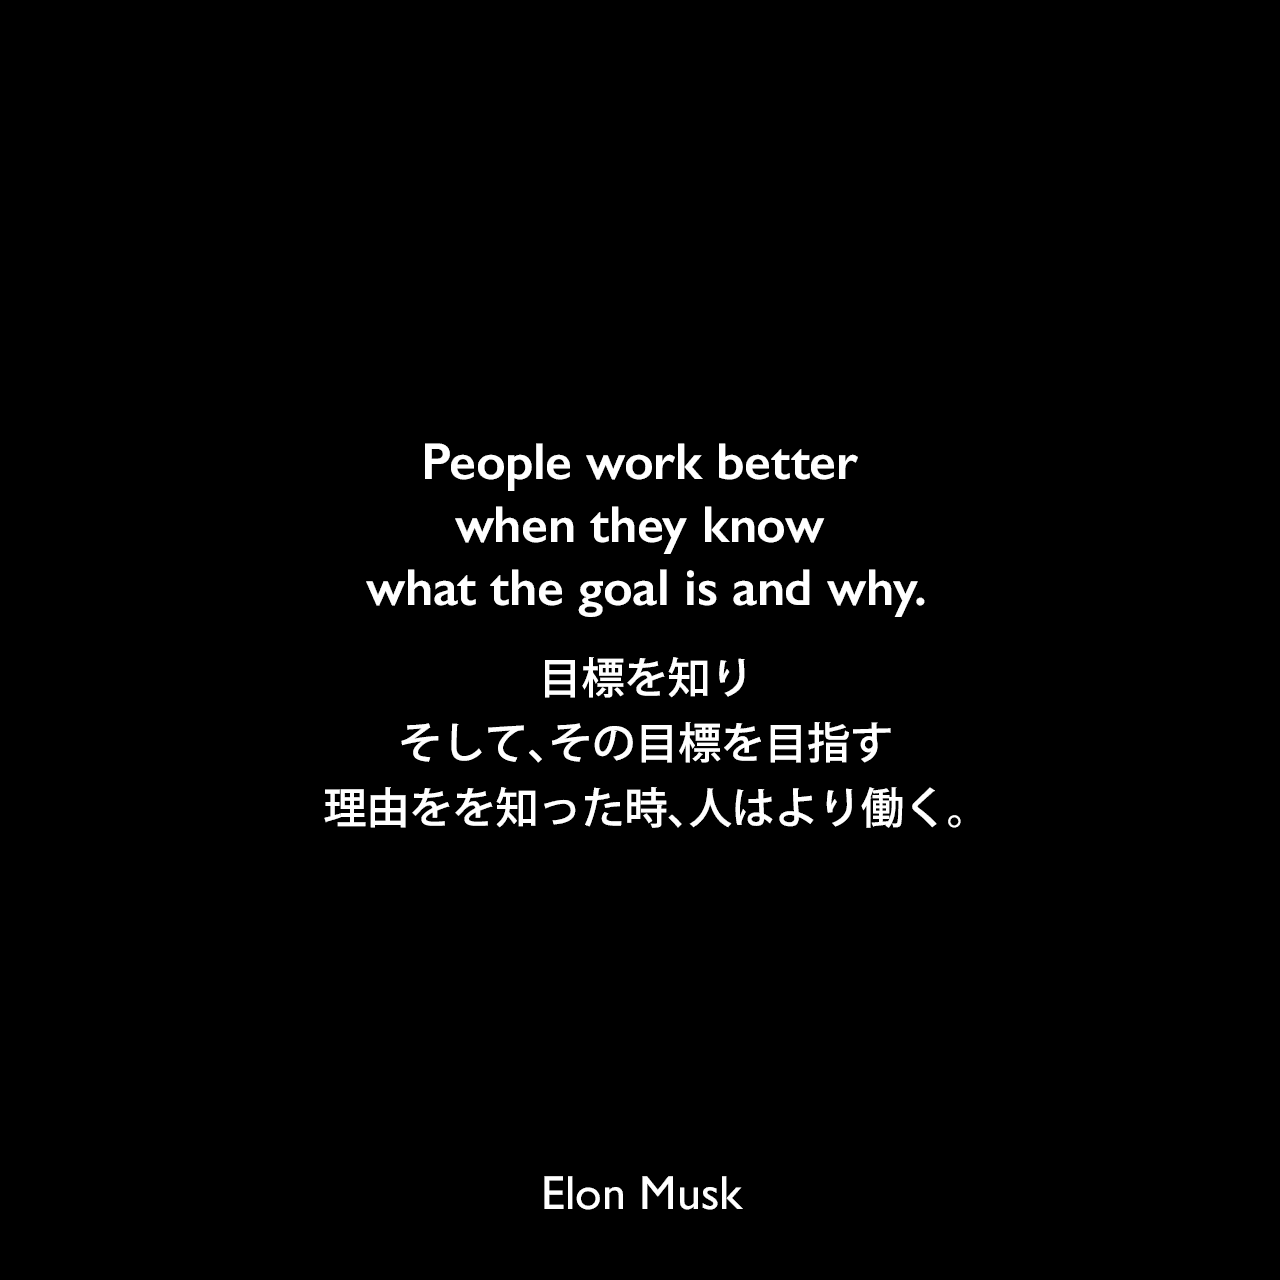 People work better when they know what the goal is and why.目標を知り、そして、その目標を目指す理由をを知った時、人はより働く。Elon Musk